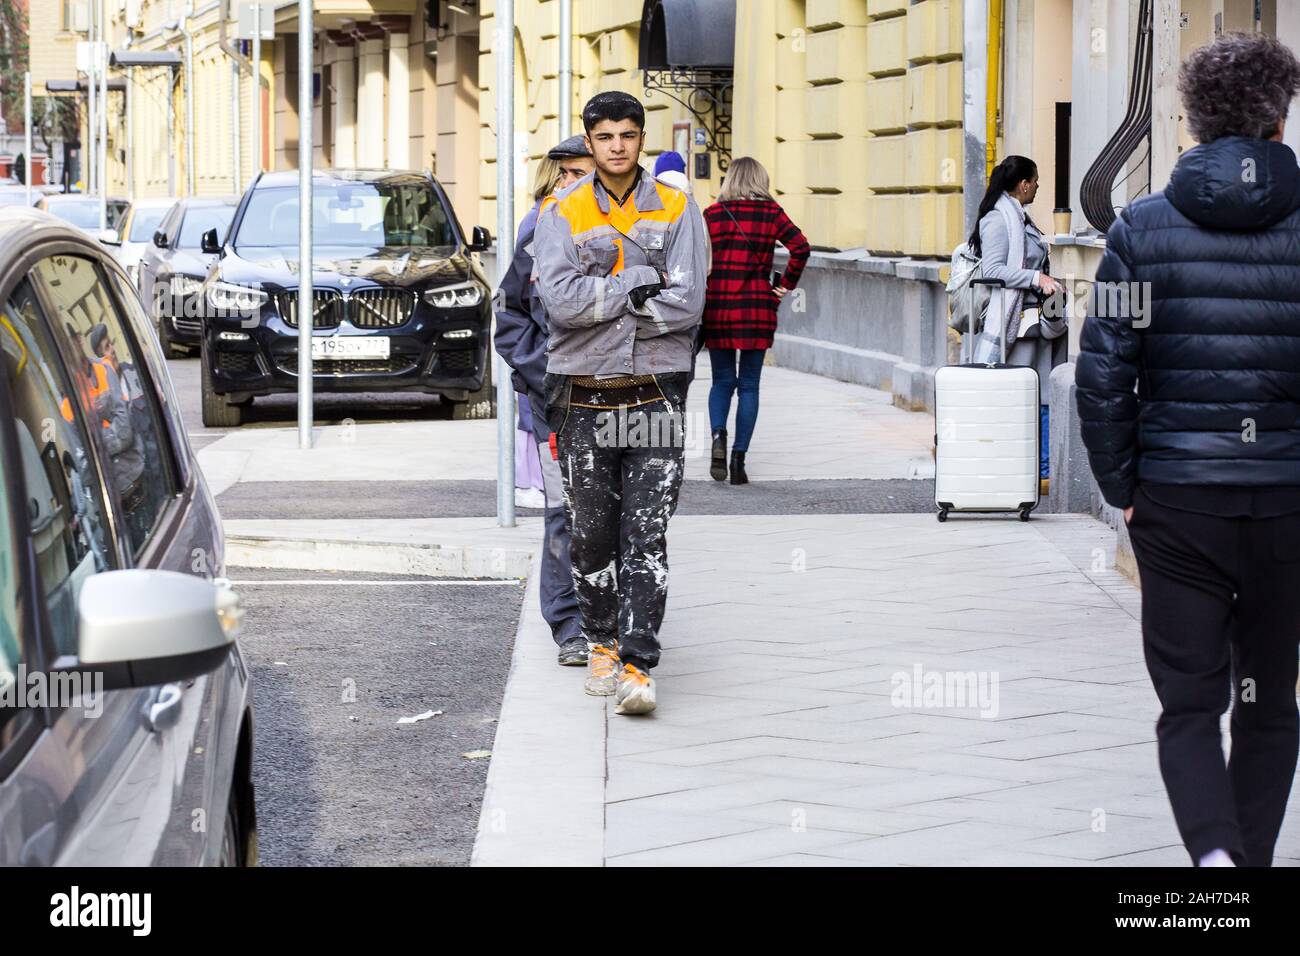 Young worker from Central Asia dressed in workwear walks on street in downtown Moscow in lunch time amid posh cars on a nice Indian summer Sept day. Stock Photo